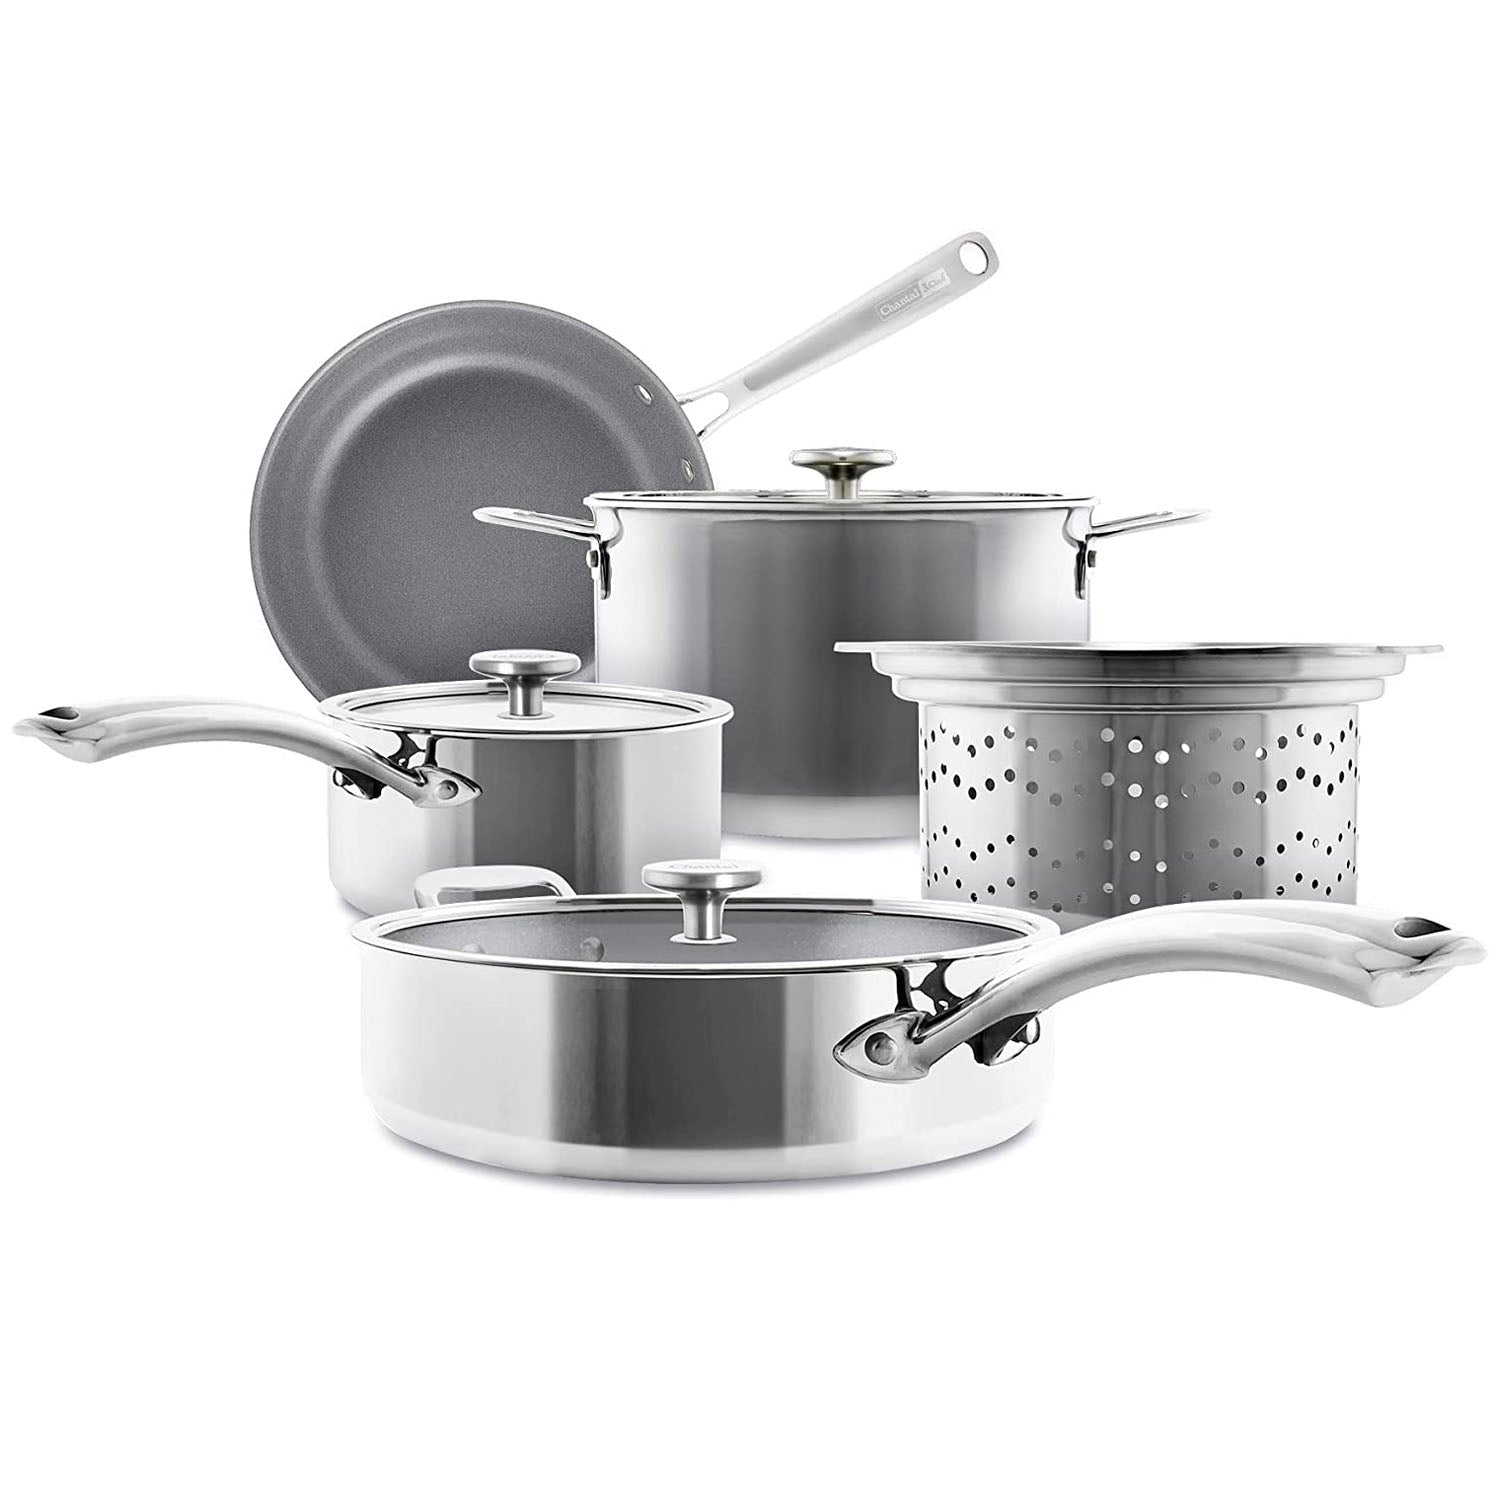 5-Piece Signature Cookware Set with Stainless Steel Knobs